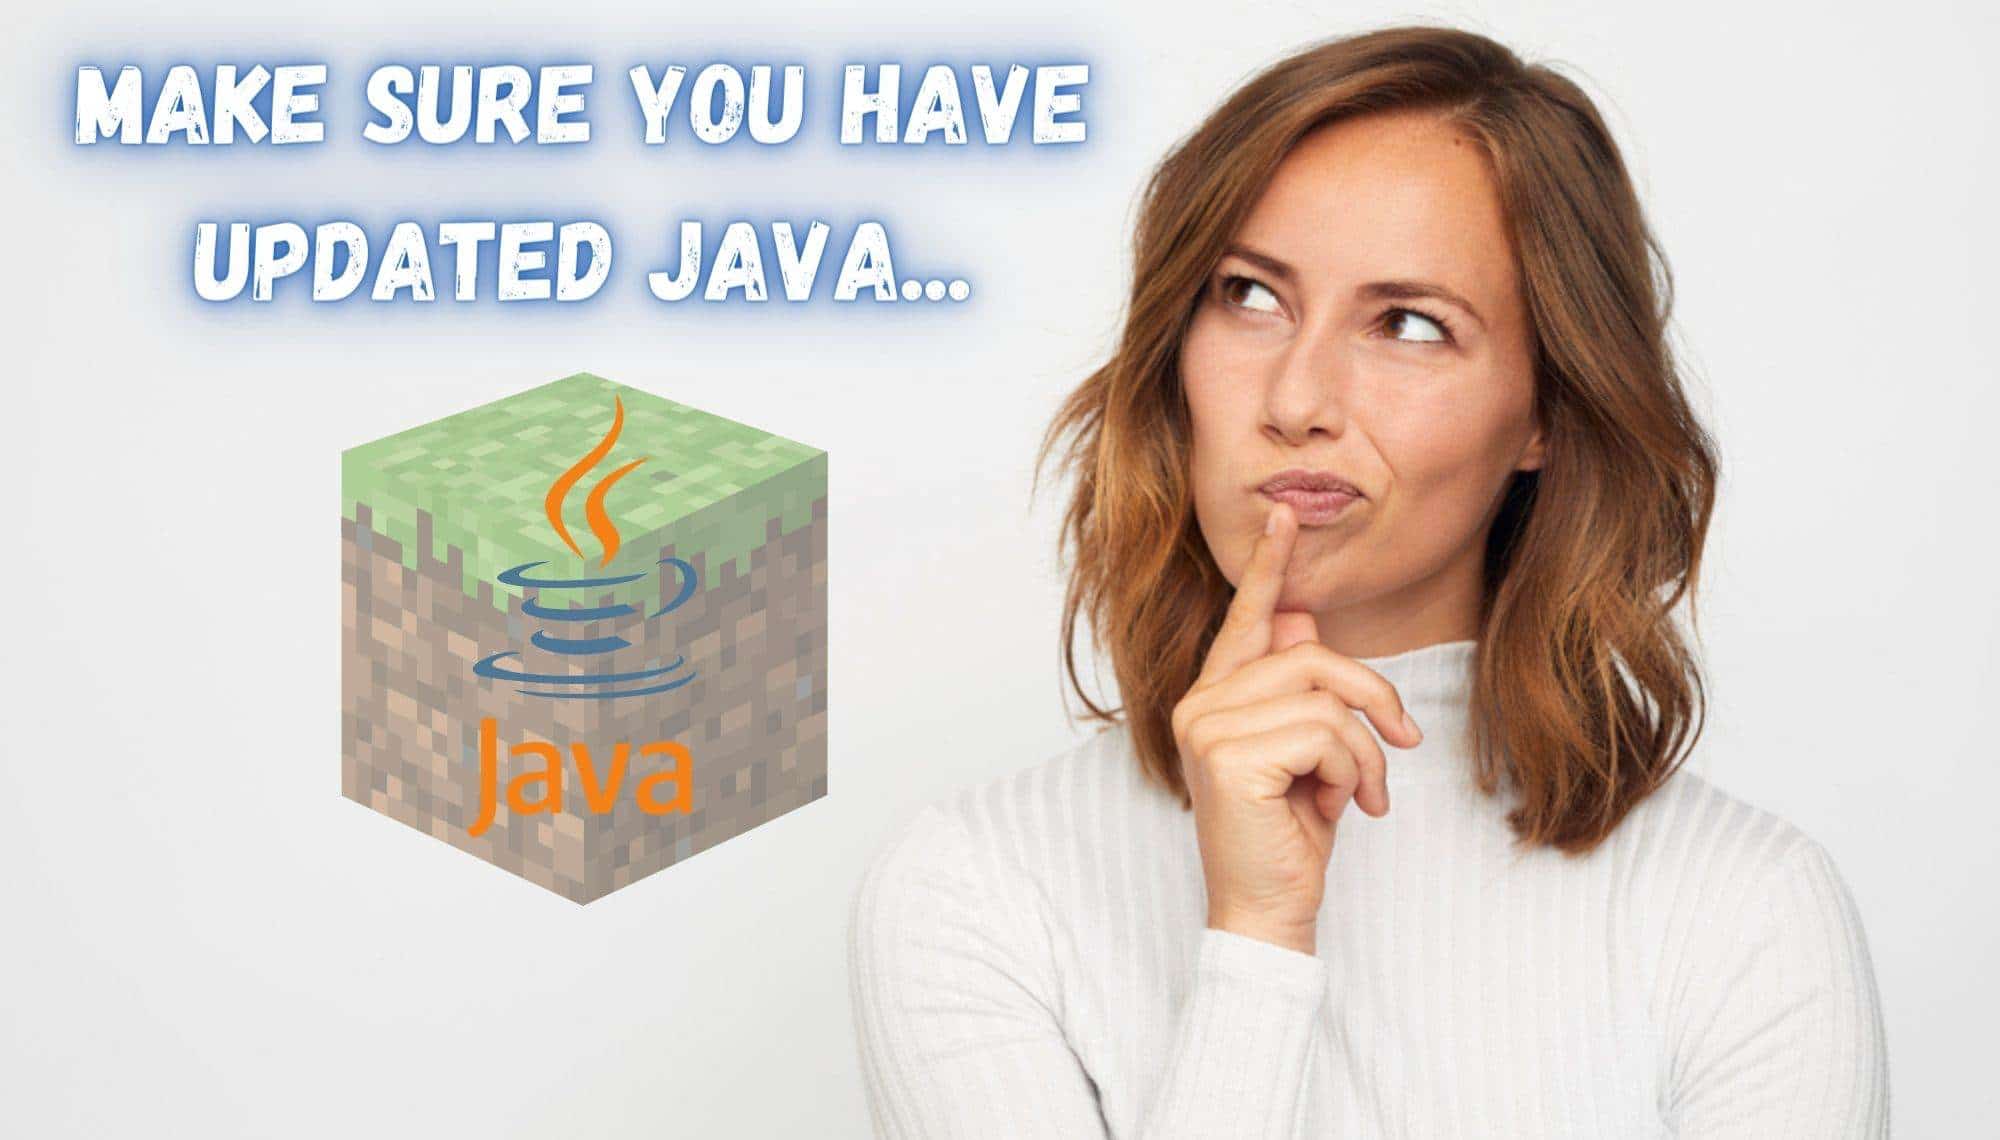 Make sure you have updated Java